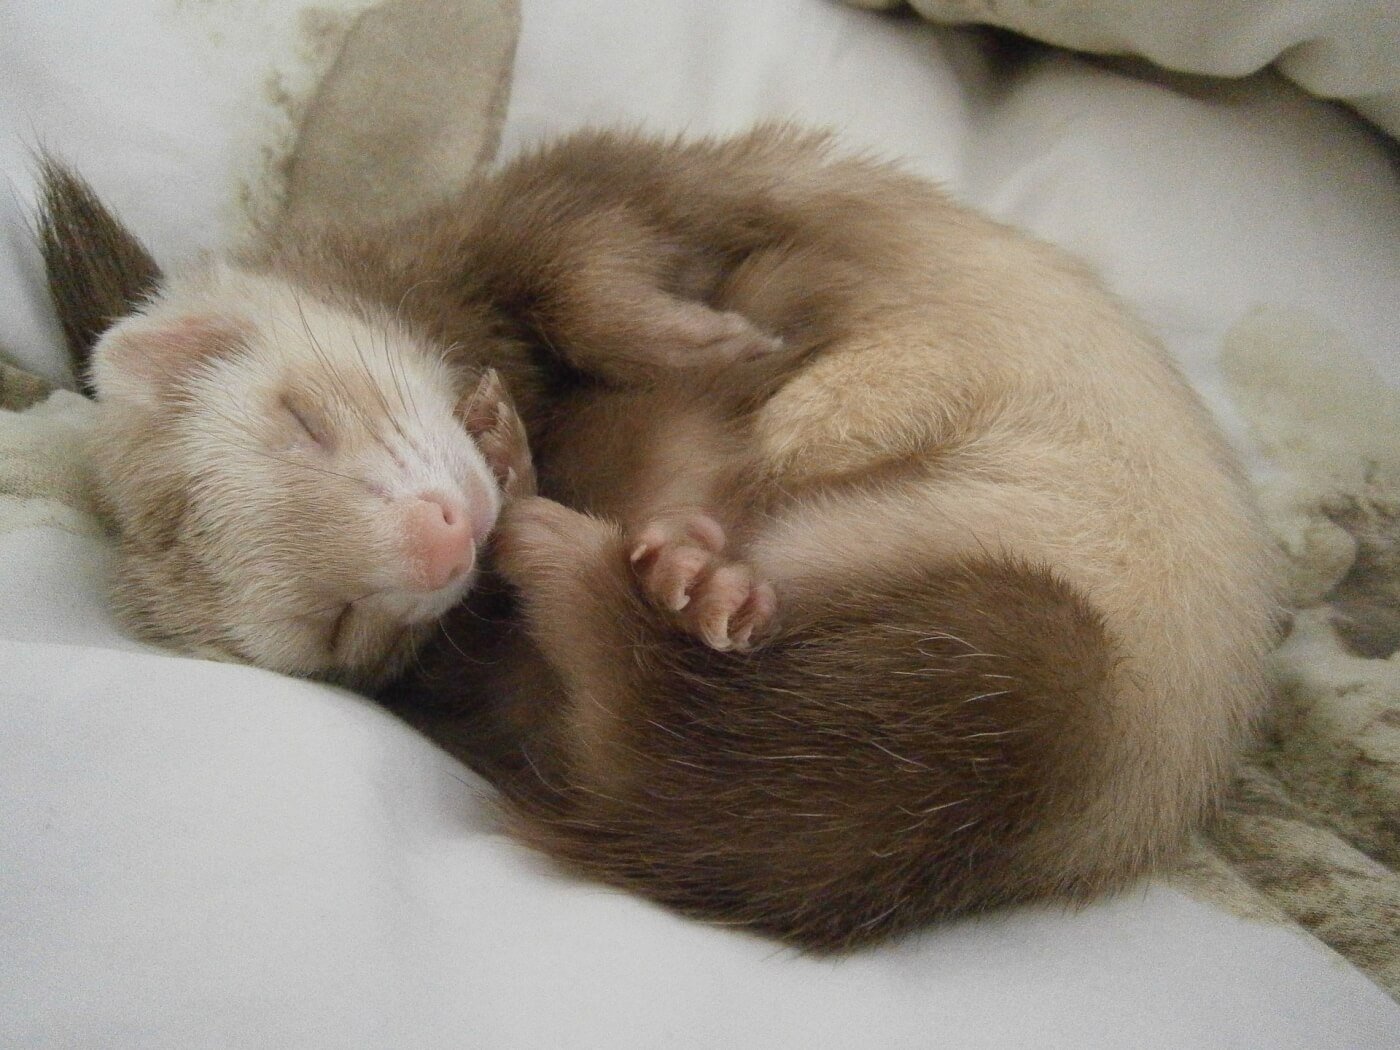 never buy ferrets for sale as pets